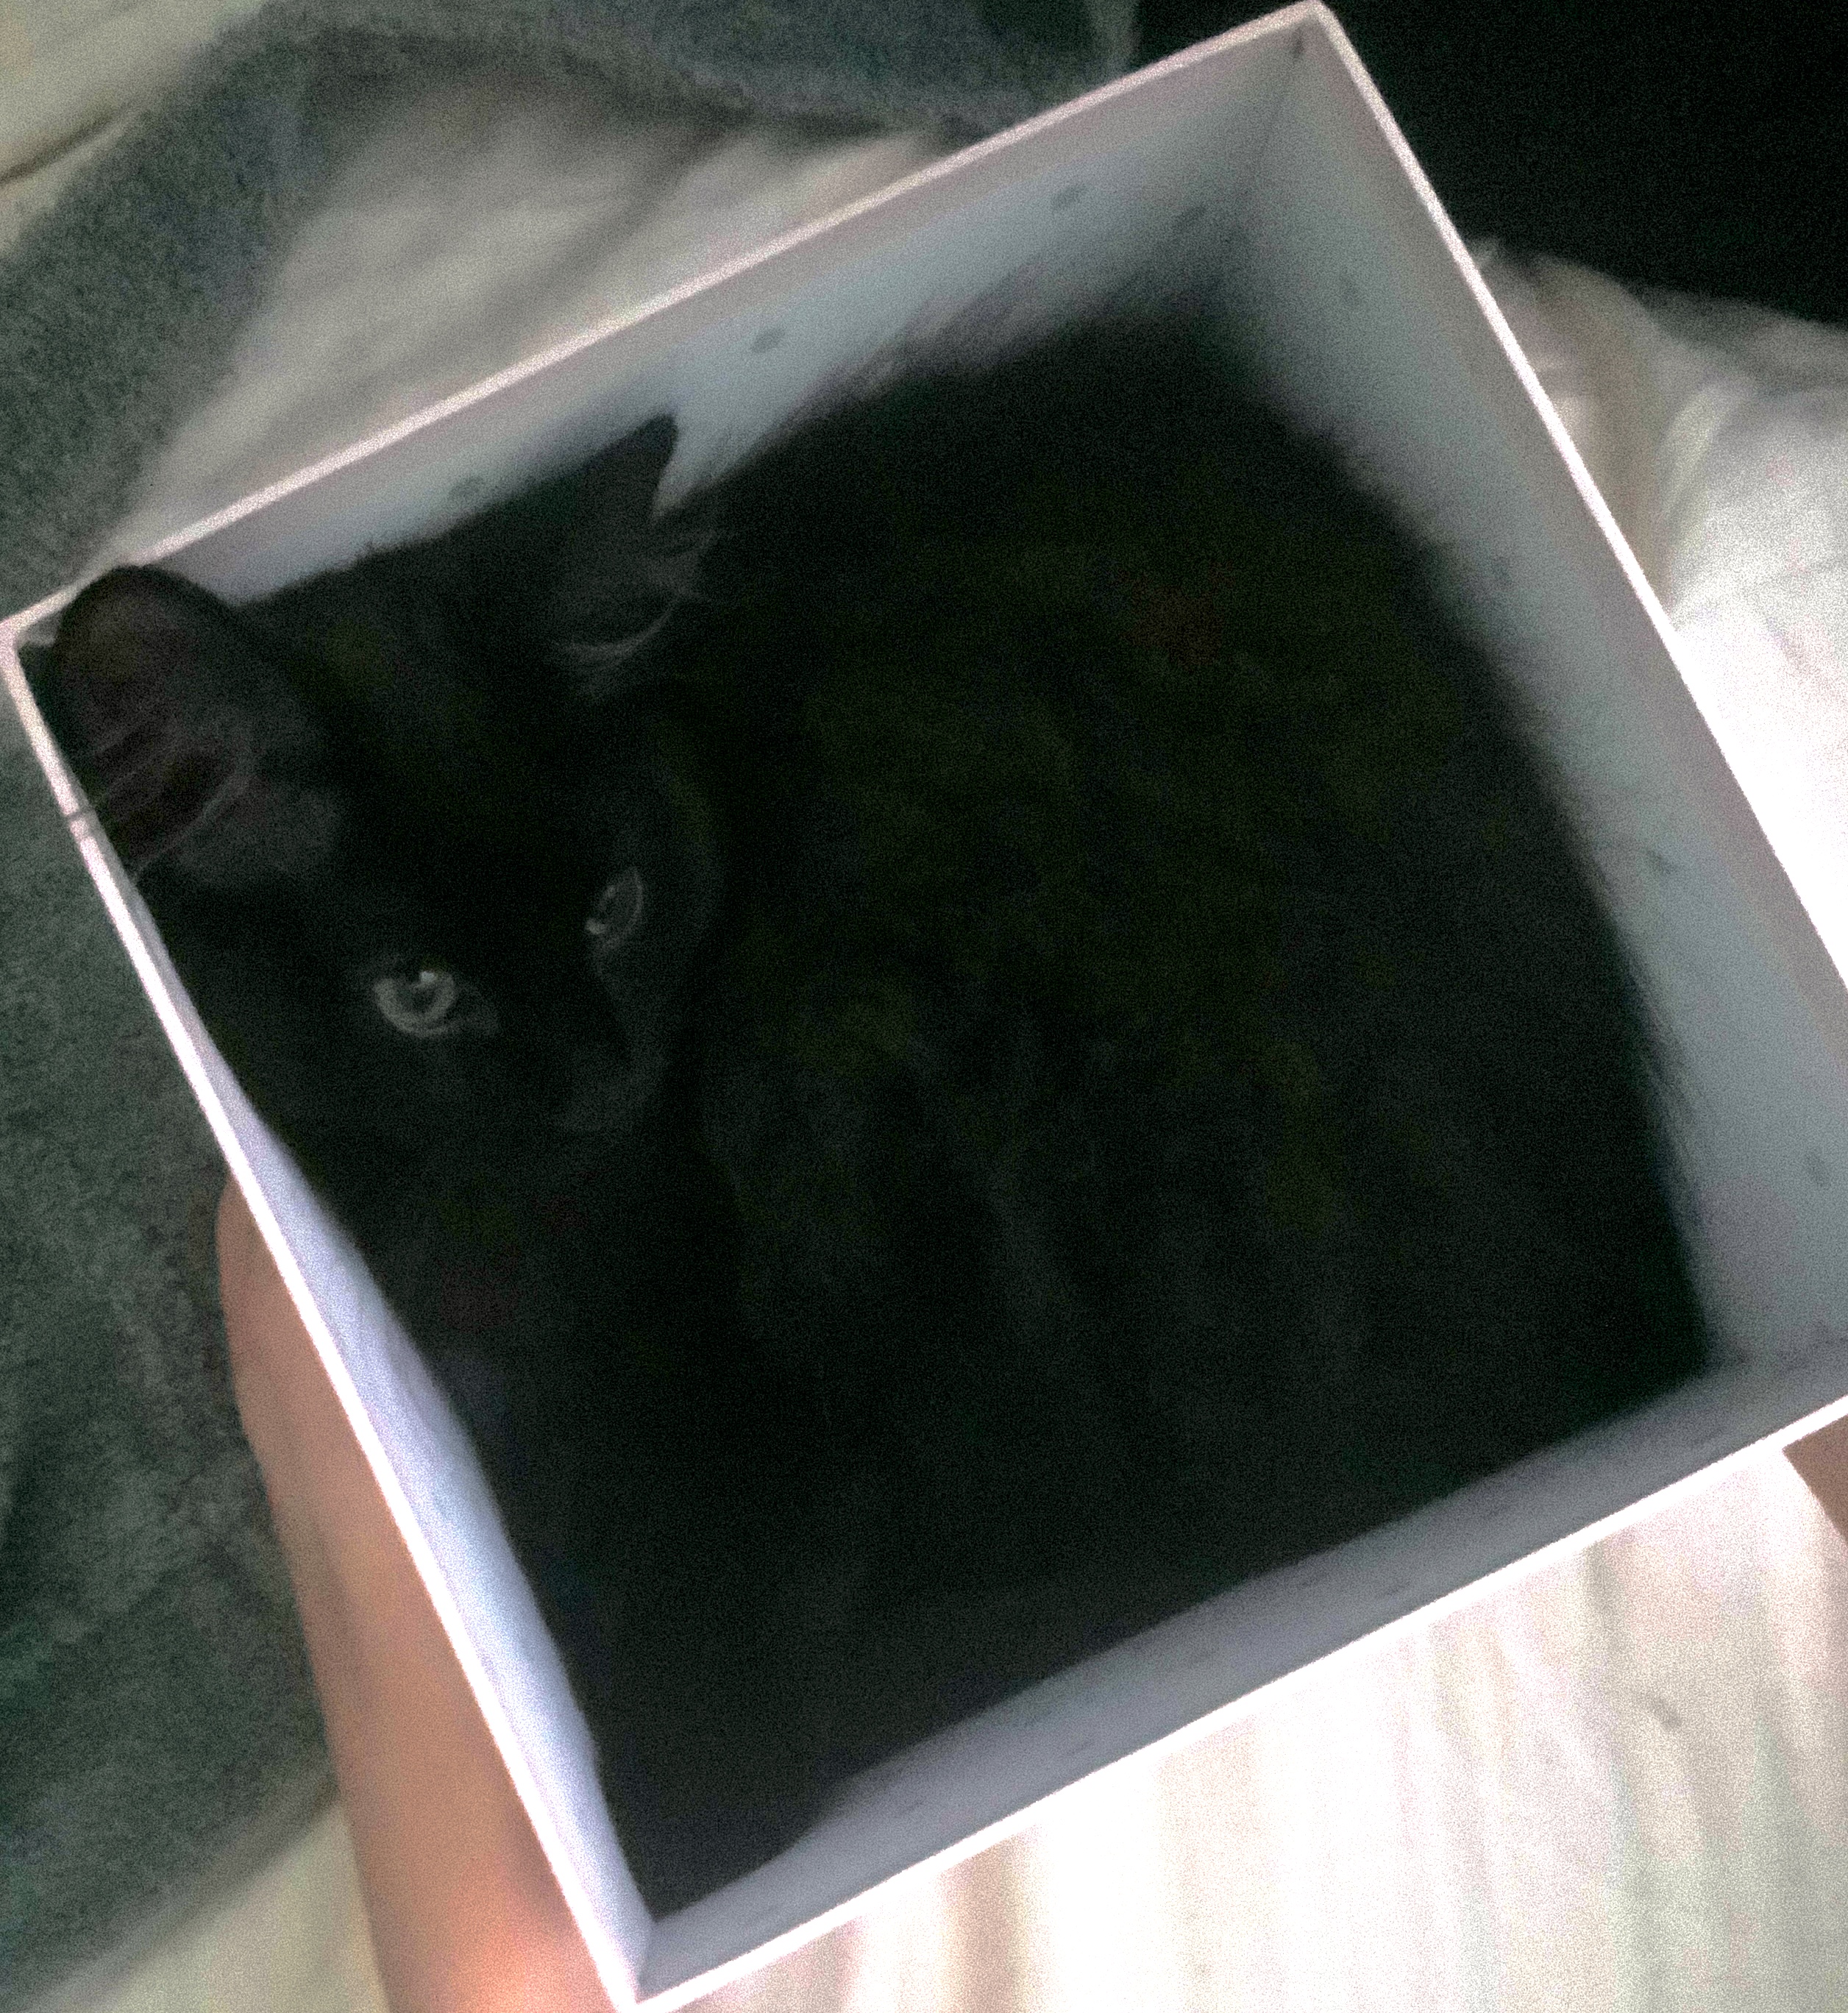 Pooby in a box!